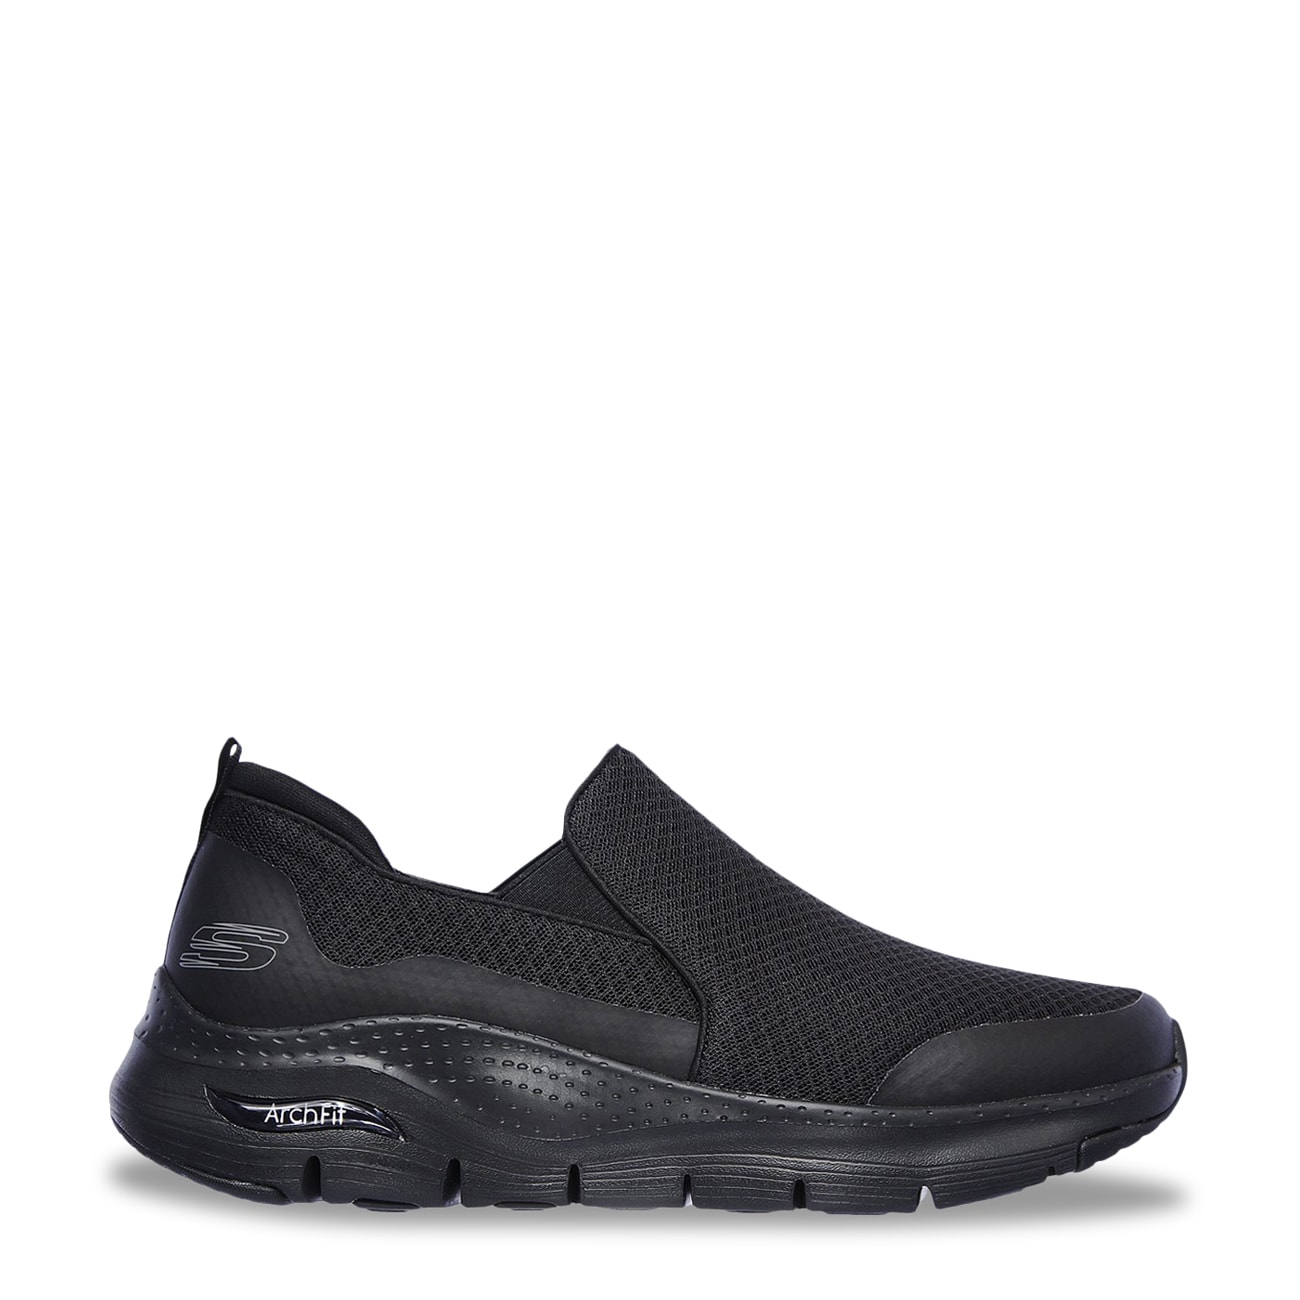 sketchers mens leather shoes